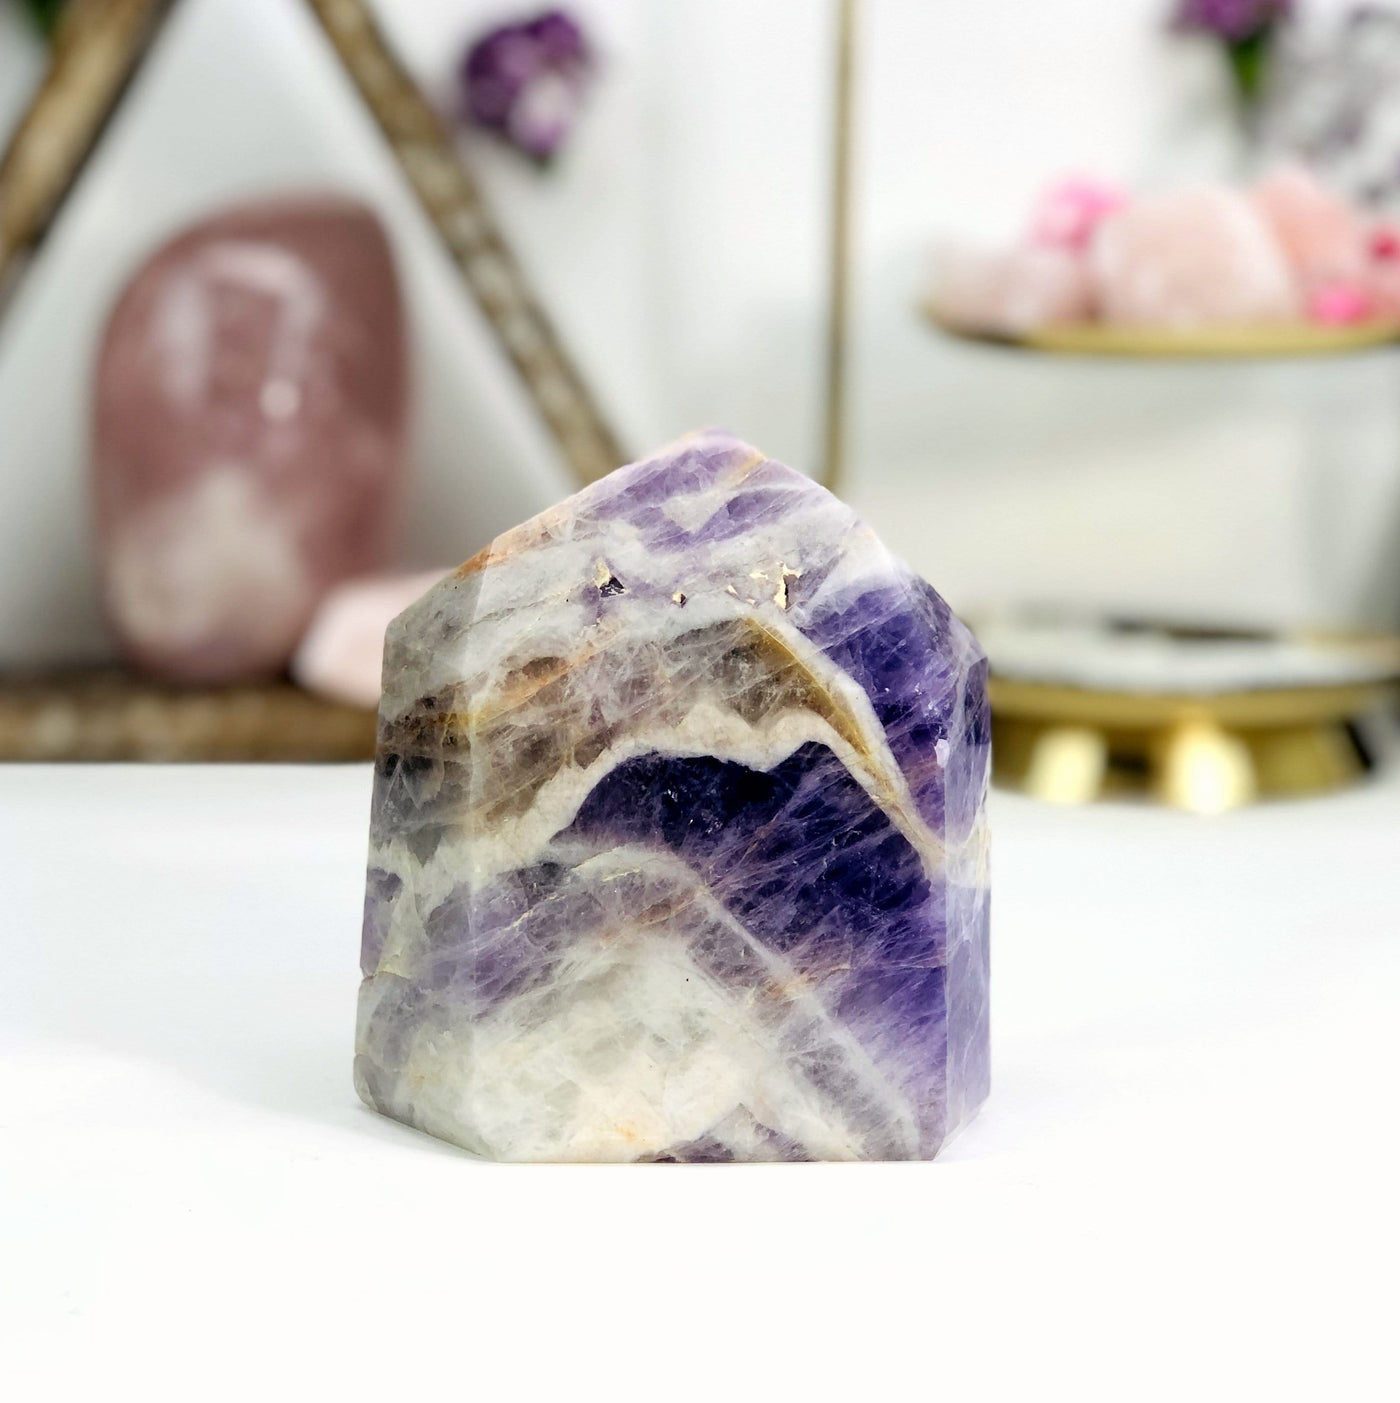 Chevron Amethyst Polished Point with decorations in the background